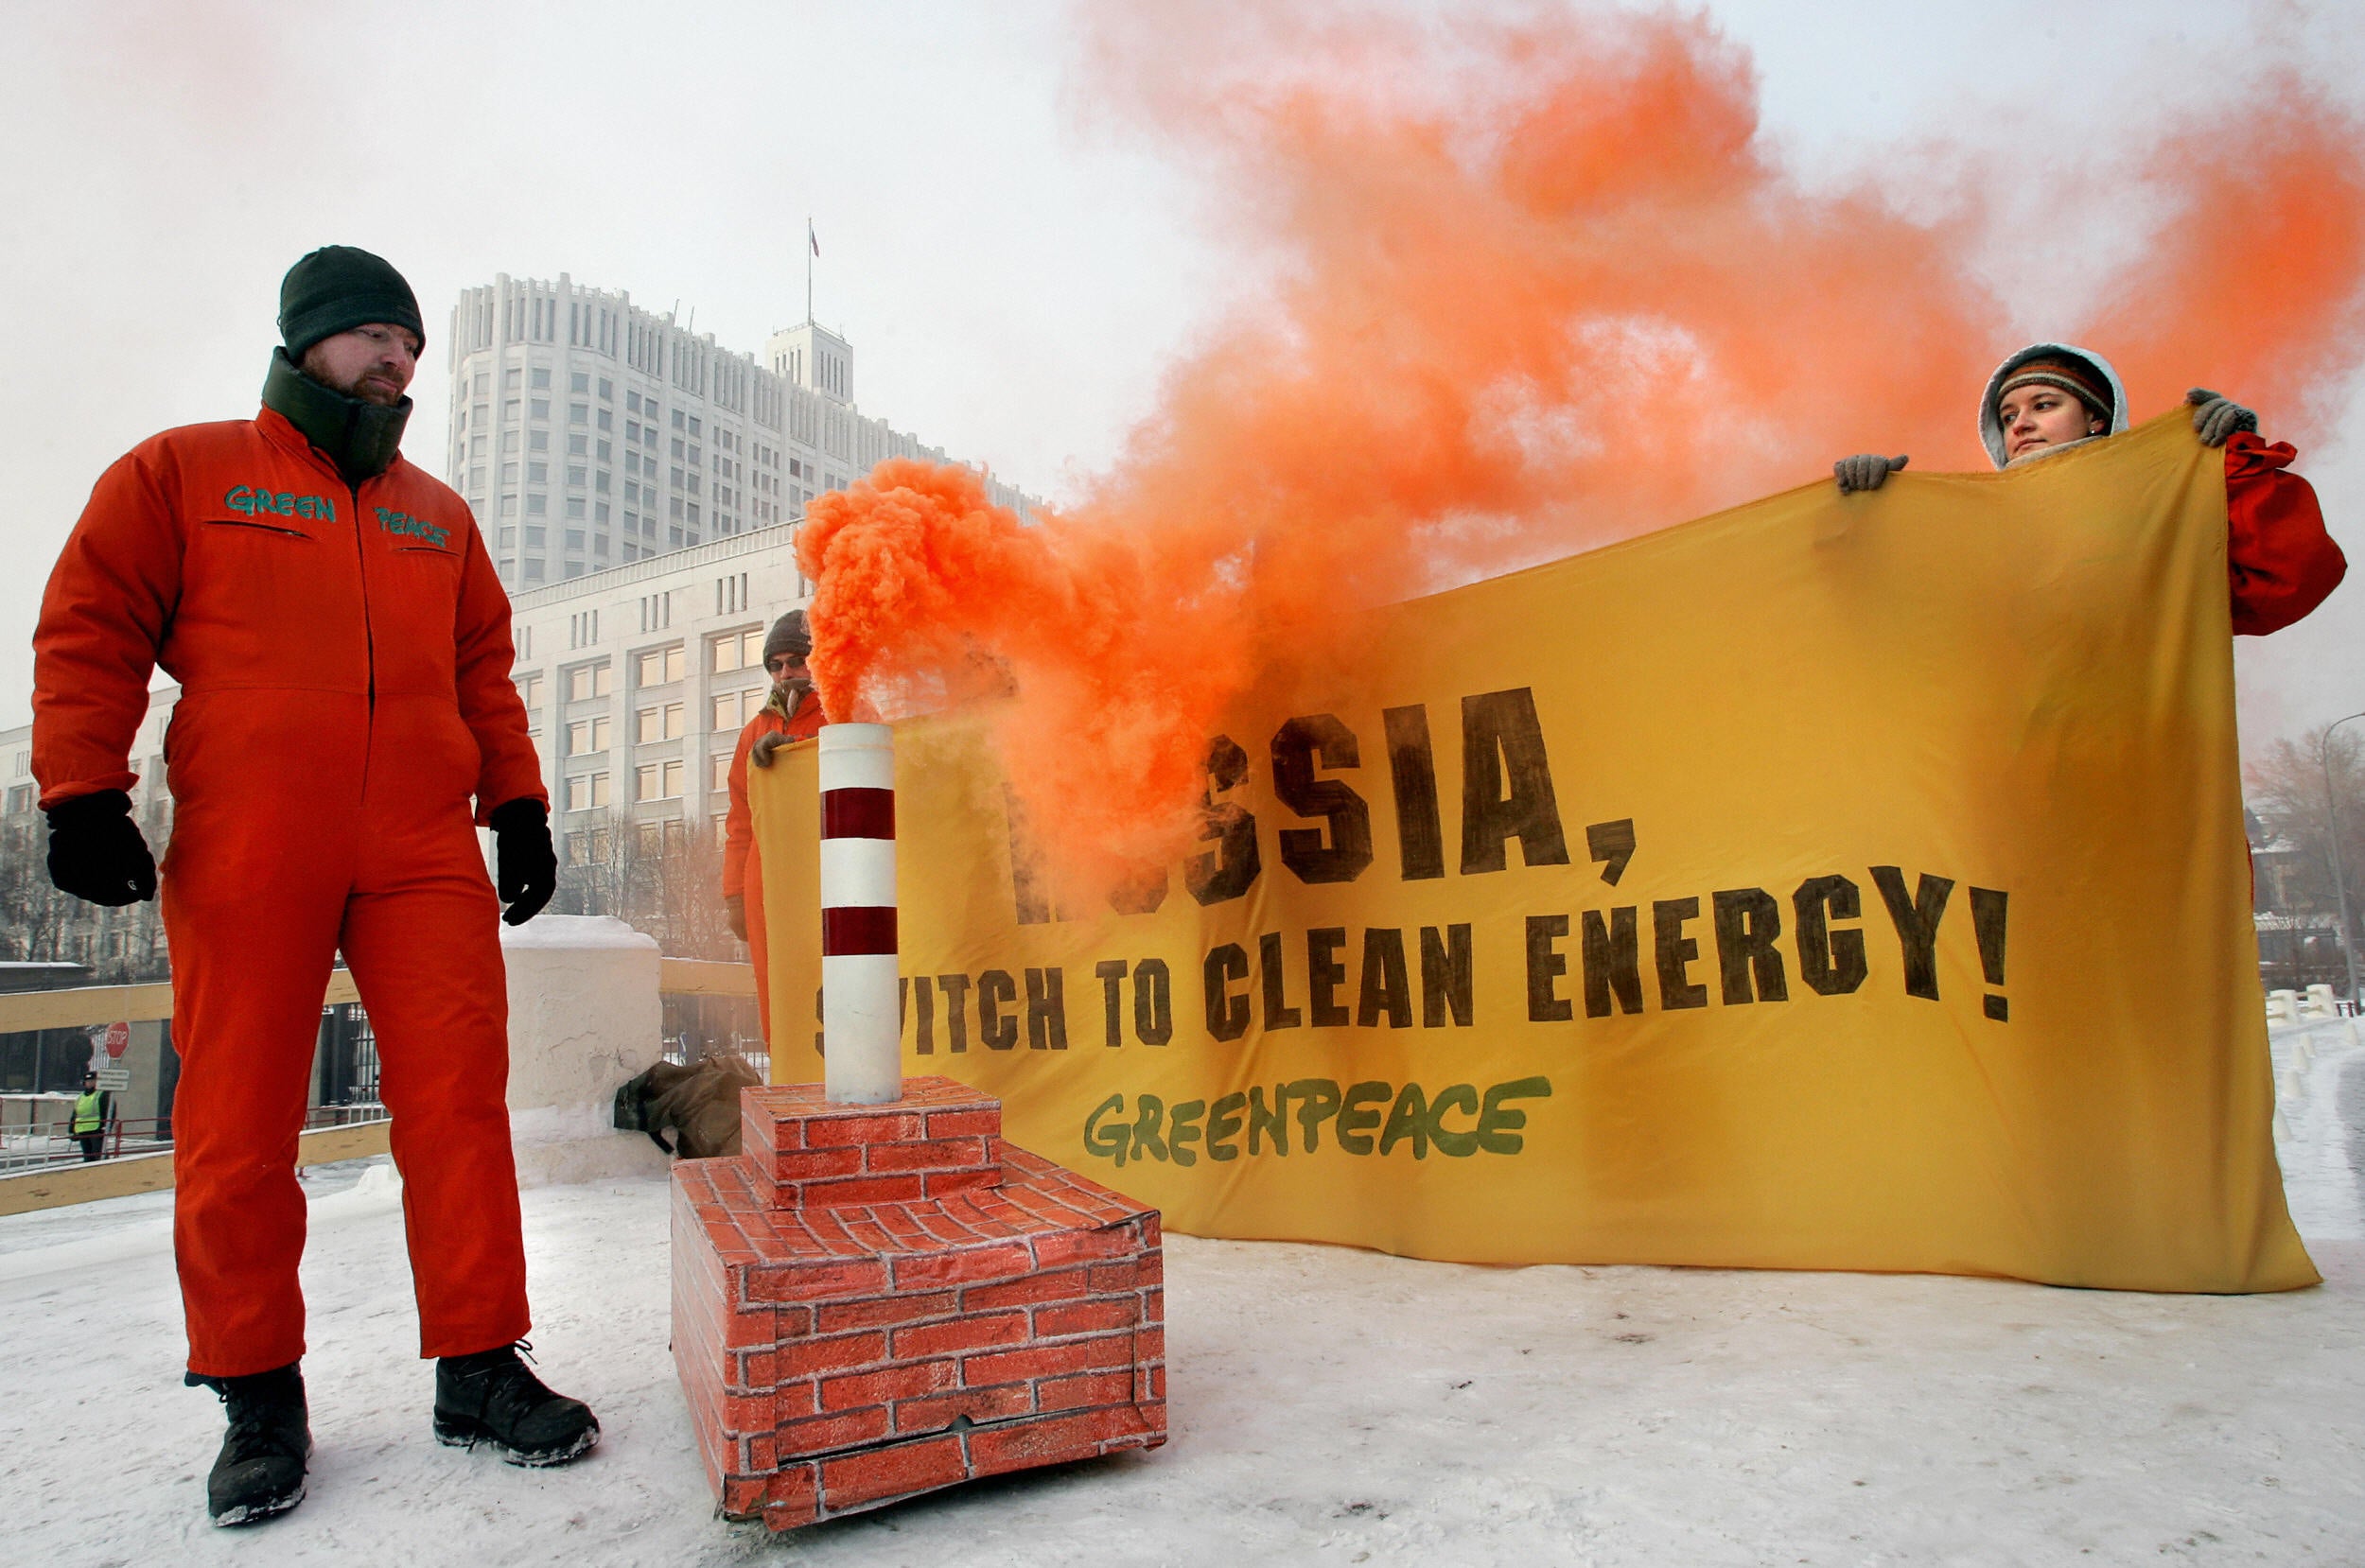 Greenpeace activists light a ‘dirty’ stove during their protest in front of the government building in Moscow